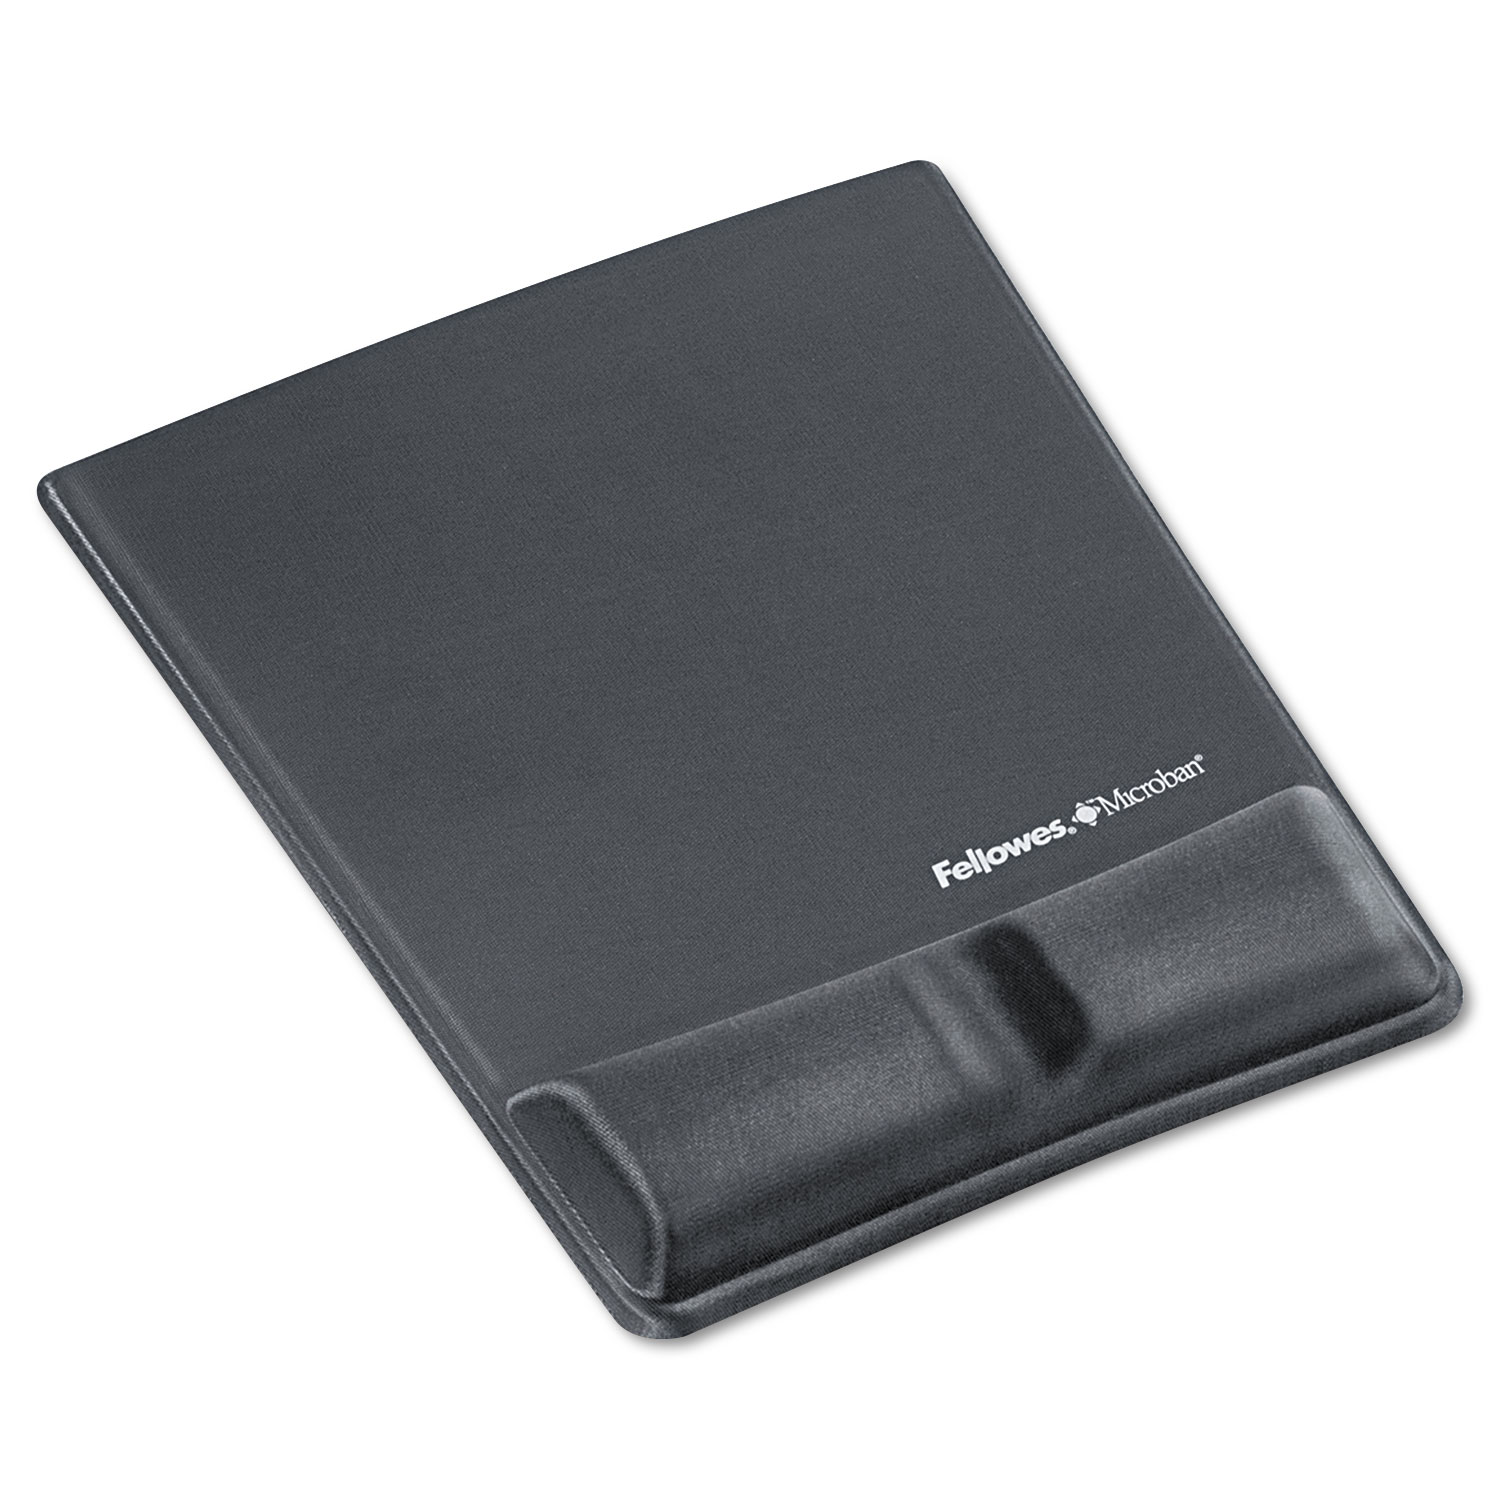  Fellowes 9184001 Memory Foam Wrist Support w/Attached Mouse Pad, Graphite (FEL9184001) 